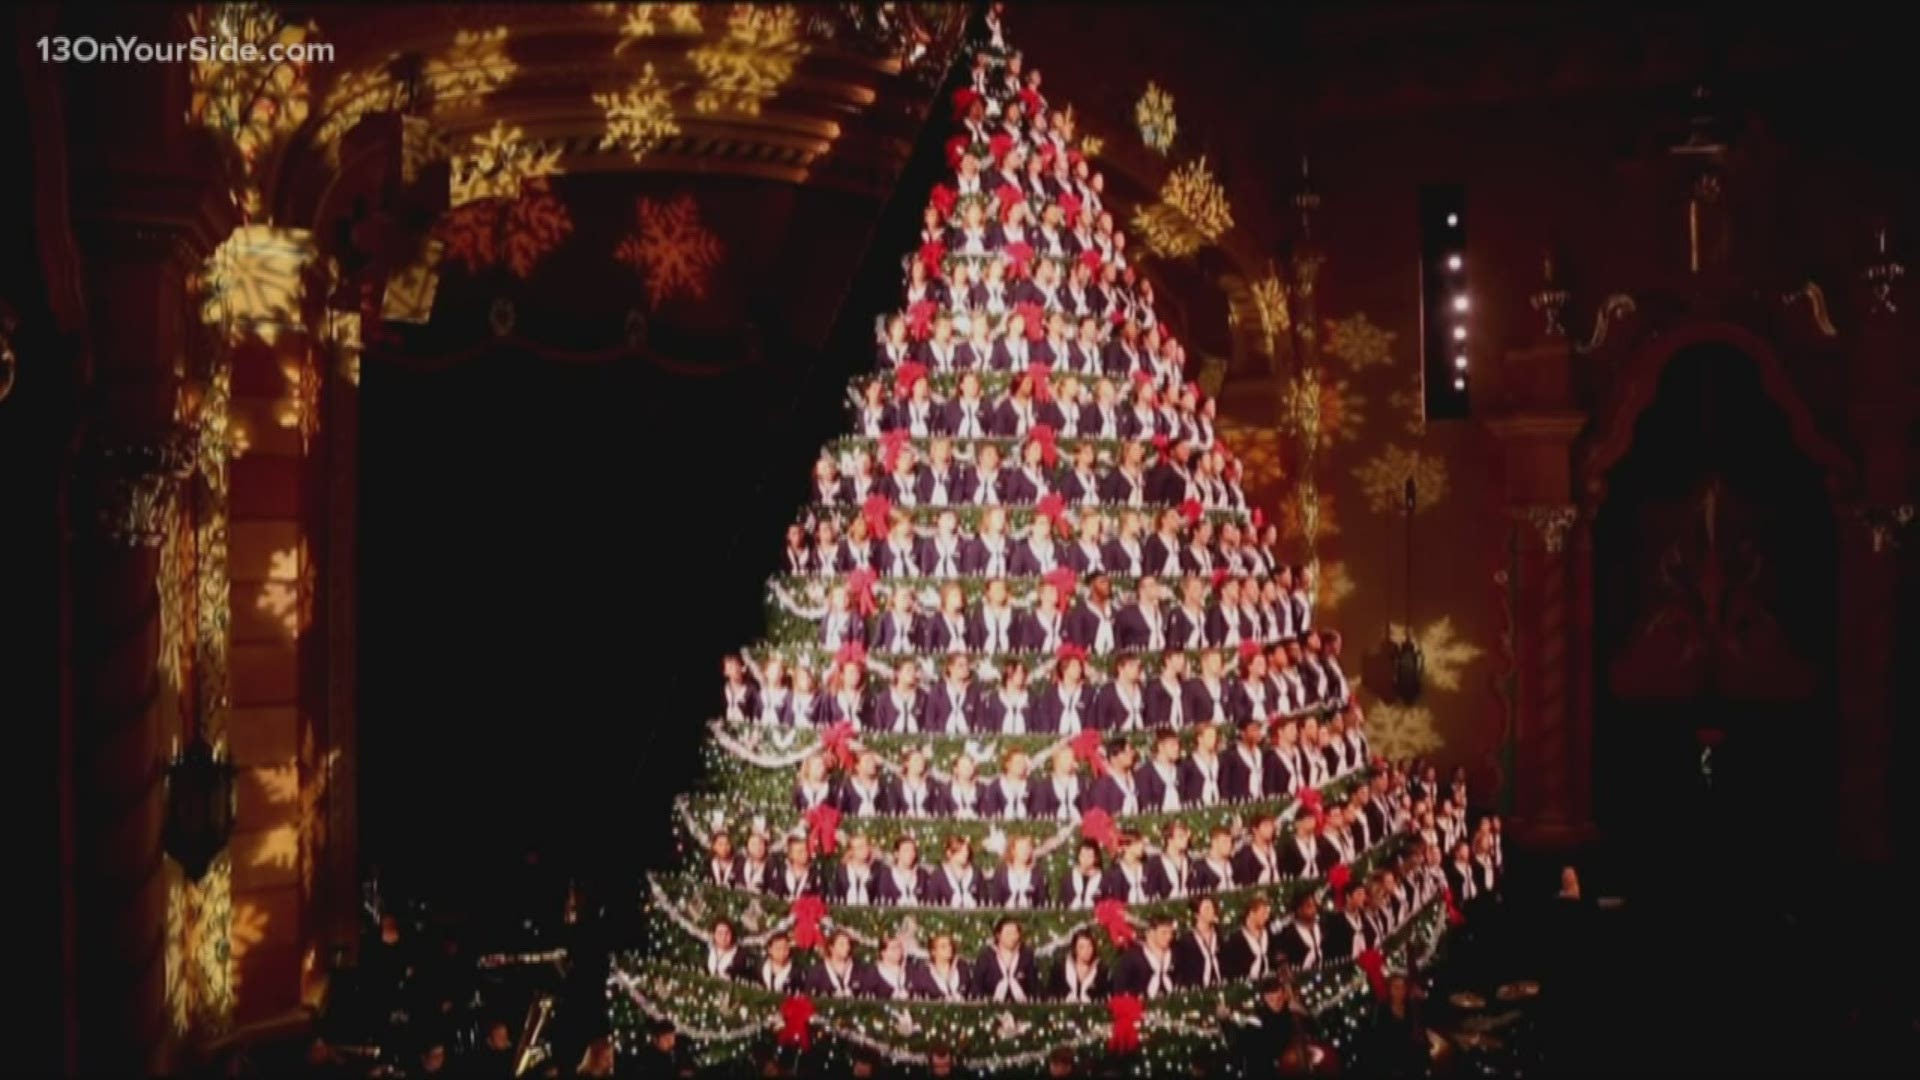 The Mona Shores Singing Christmas Tree program is teaming up with American Legion Post 28 in Grand Haven to put on a special holiday show.